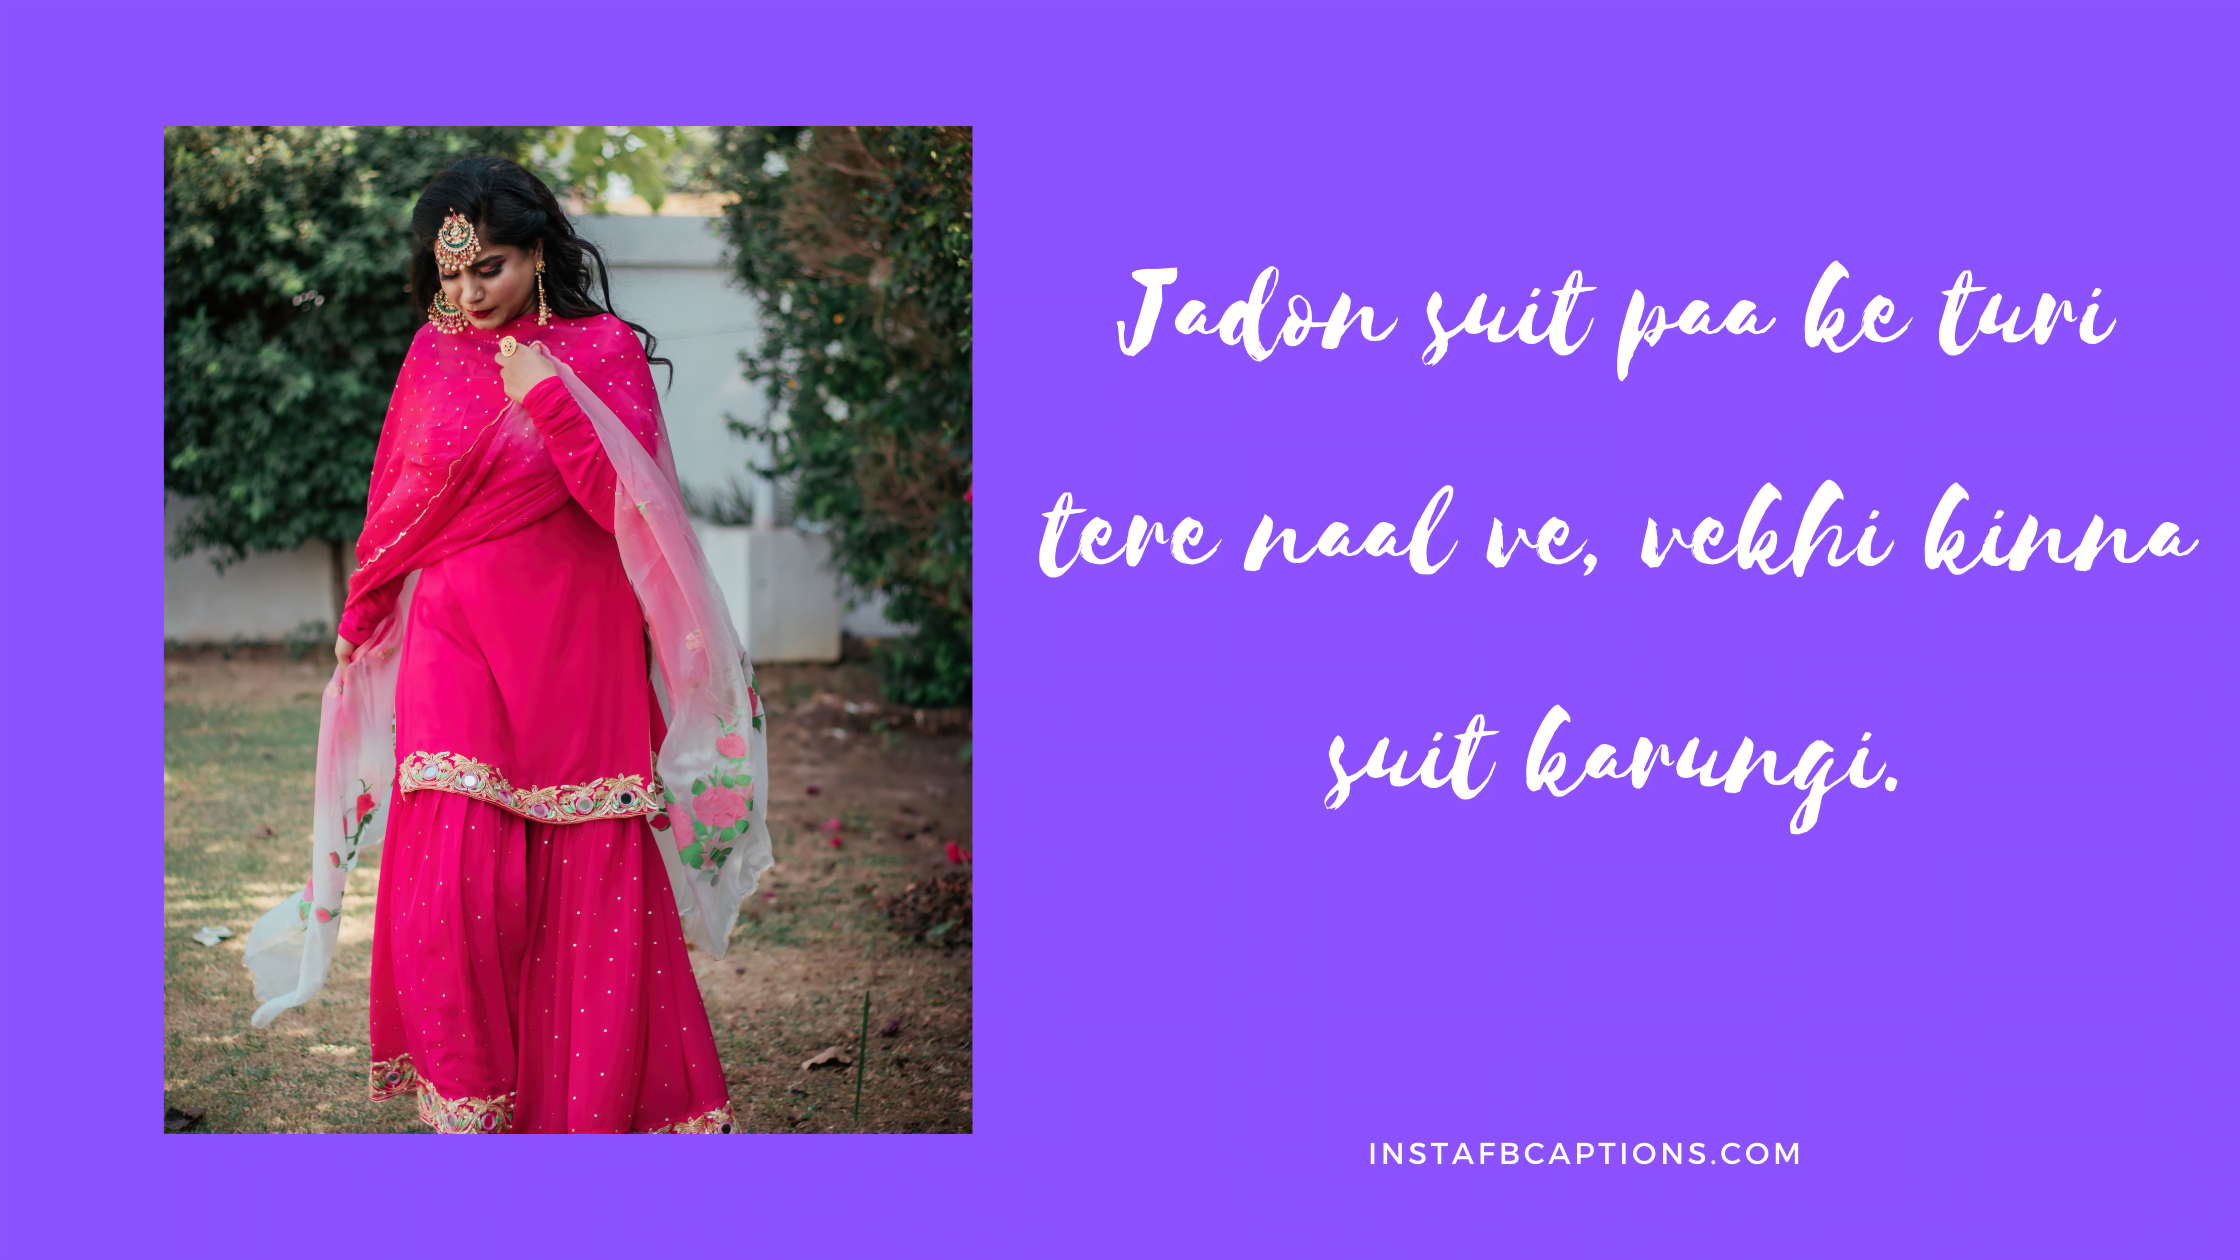 Best Punjabi Song Captions For Pictures In Suit  - Best Punjabi Song Captions For Pictures In Suit - Punjabi Song Lyrics as Captions for Instagram Pics in 2022